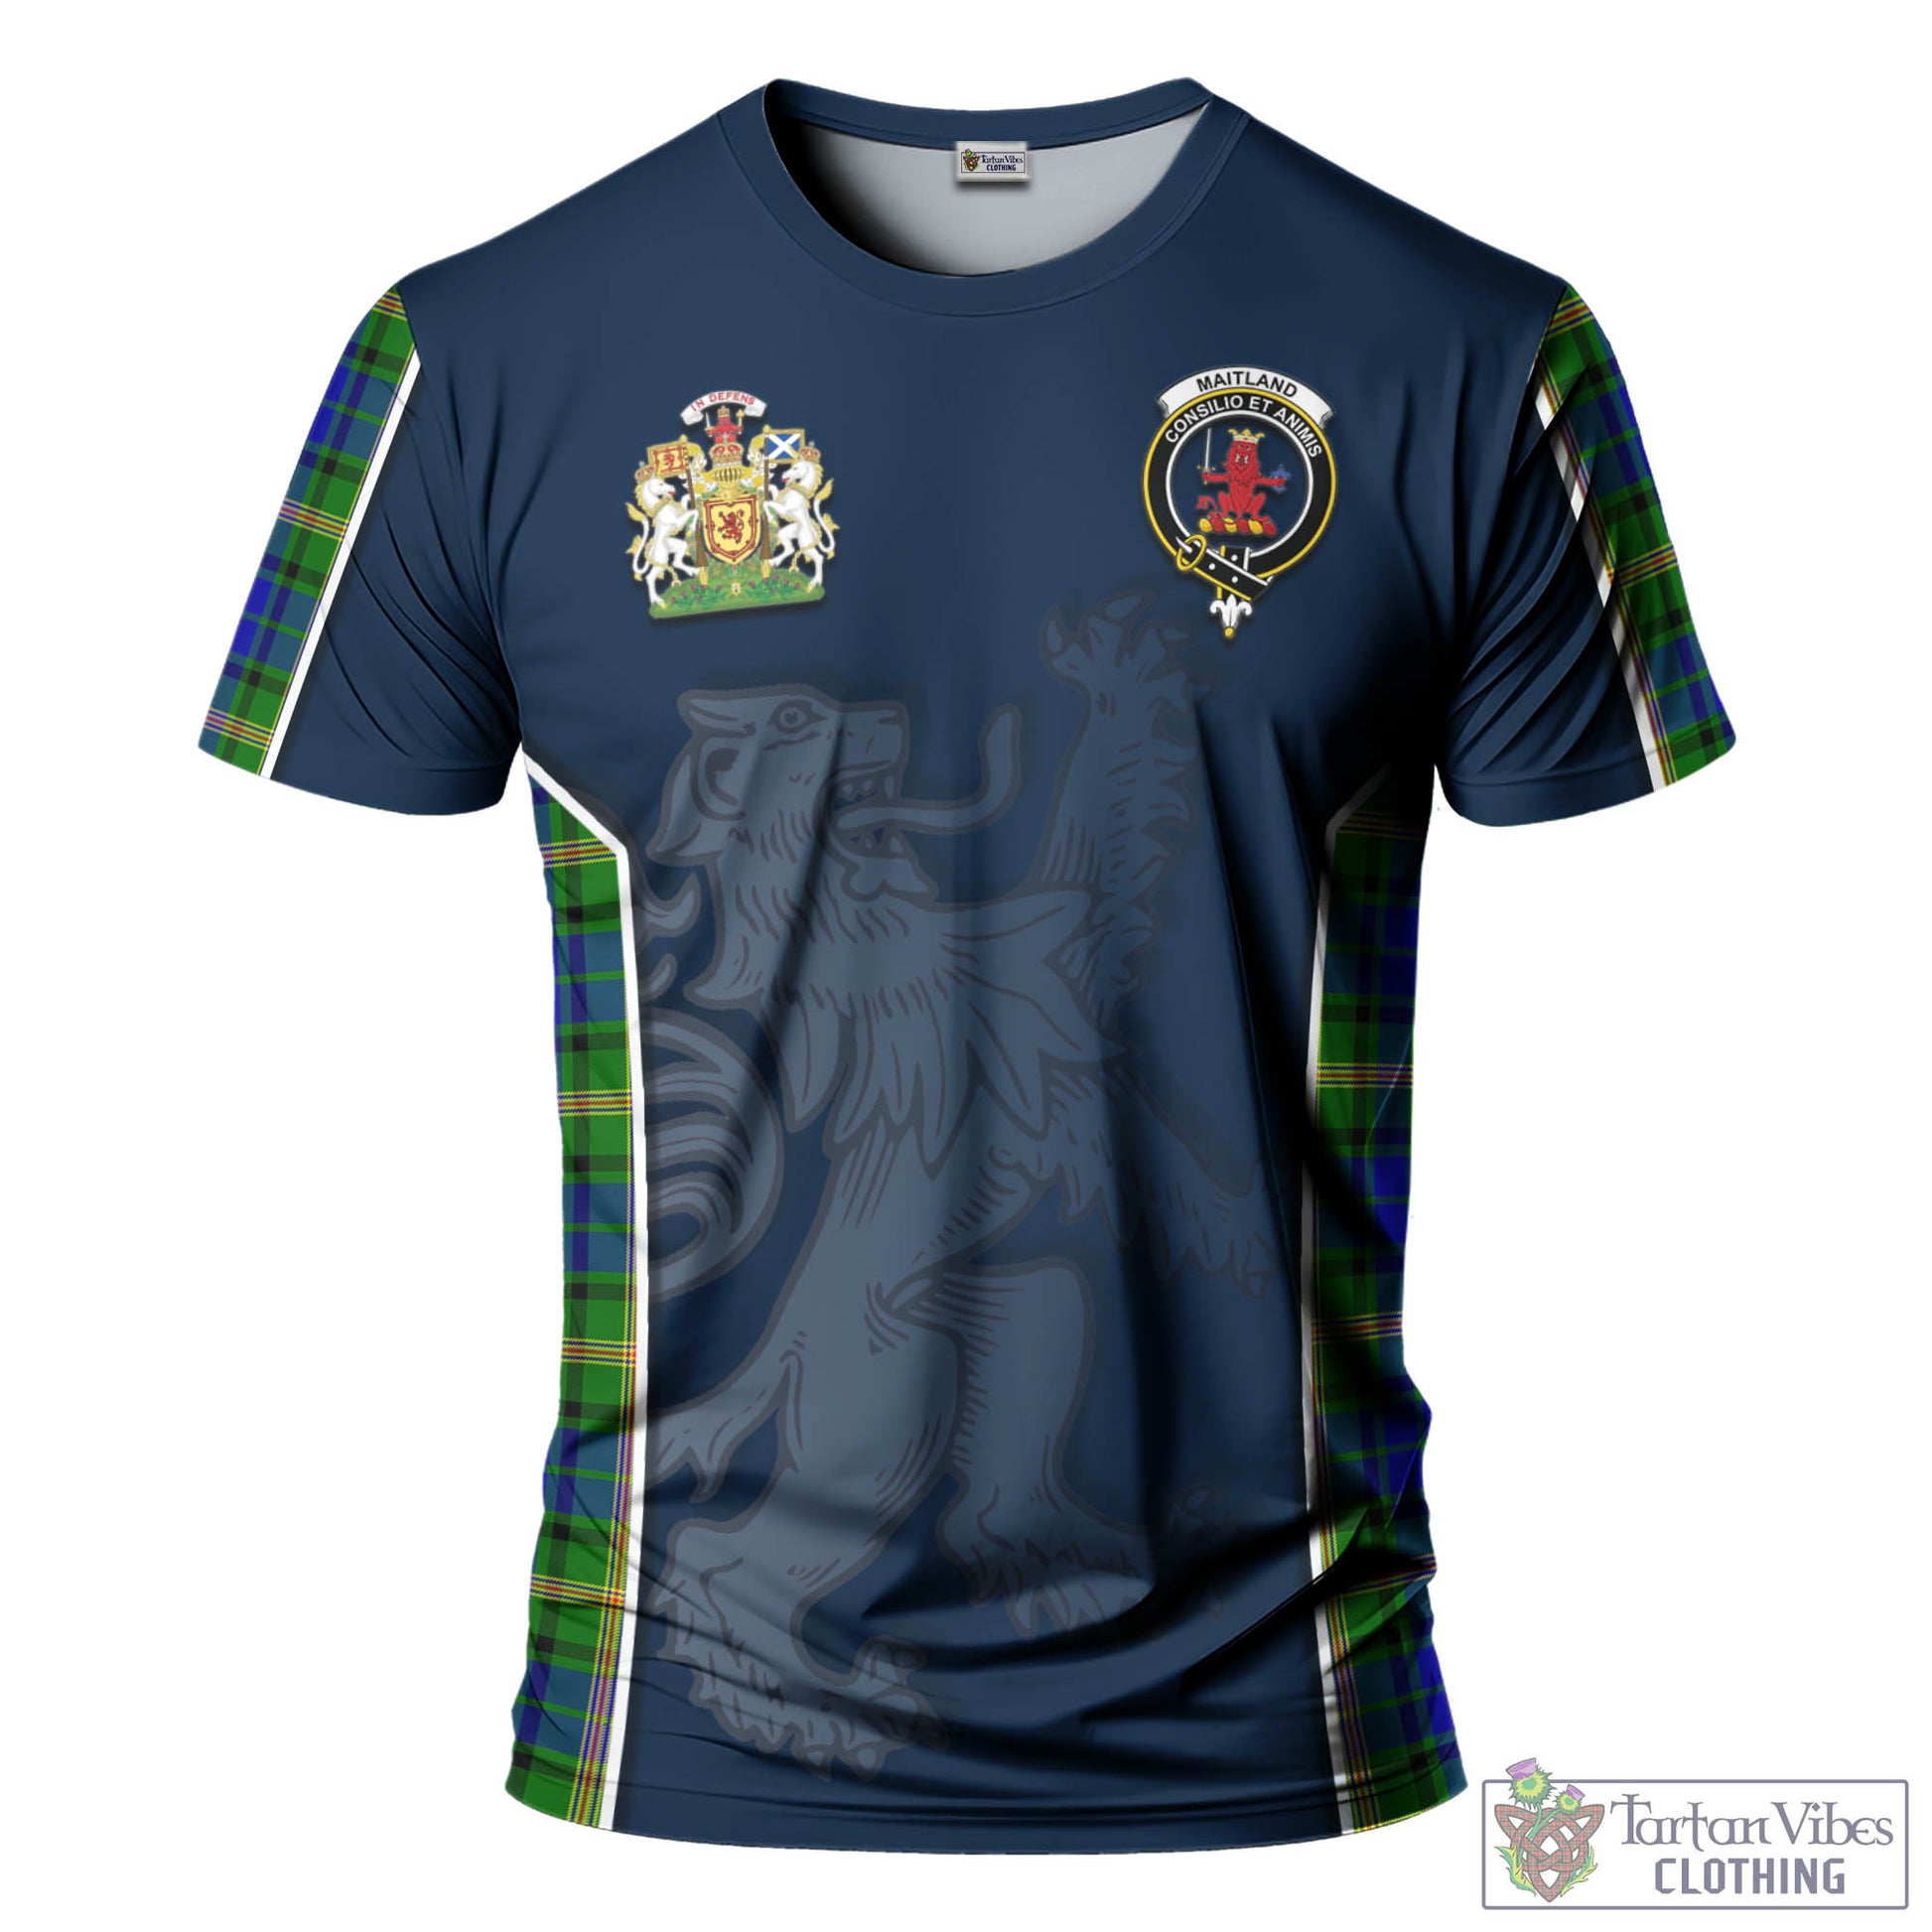 Tartan Vibes Clothing Maitland Tartan T-Shirt with Family Crest and Lion Rampant Vibes Sport Style